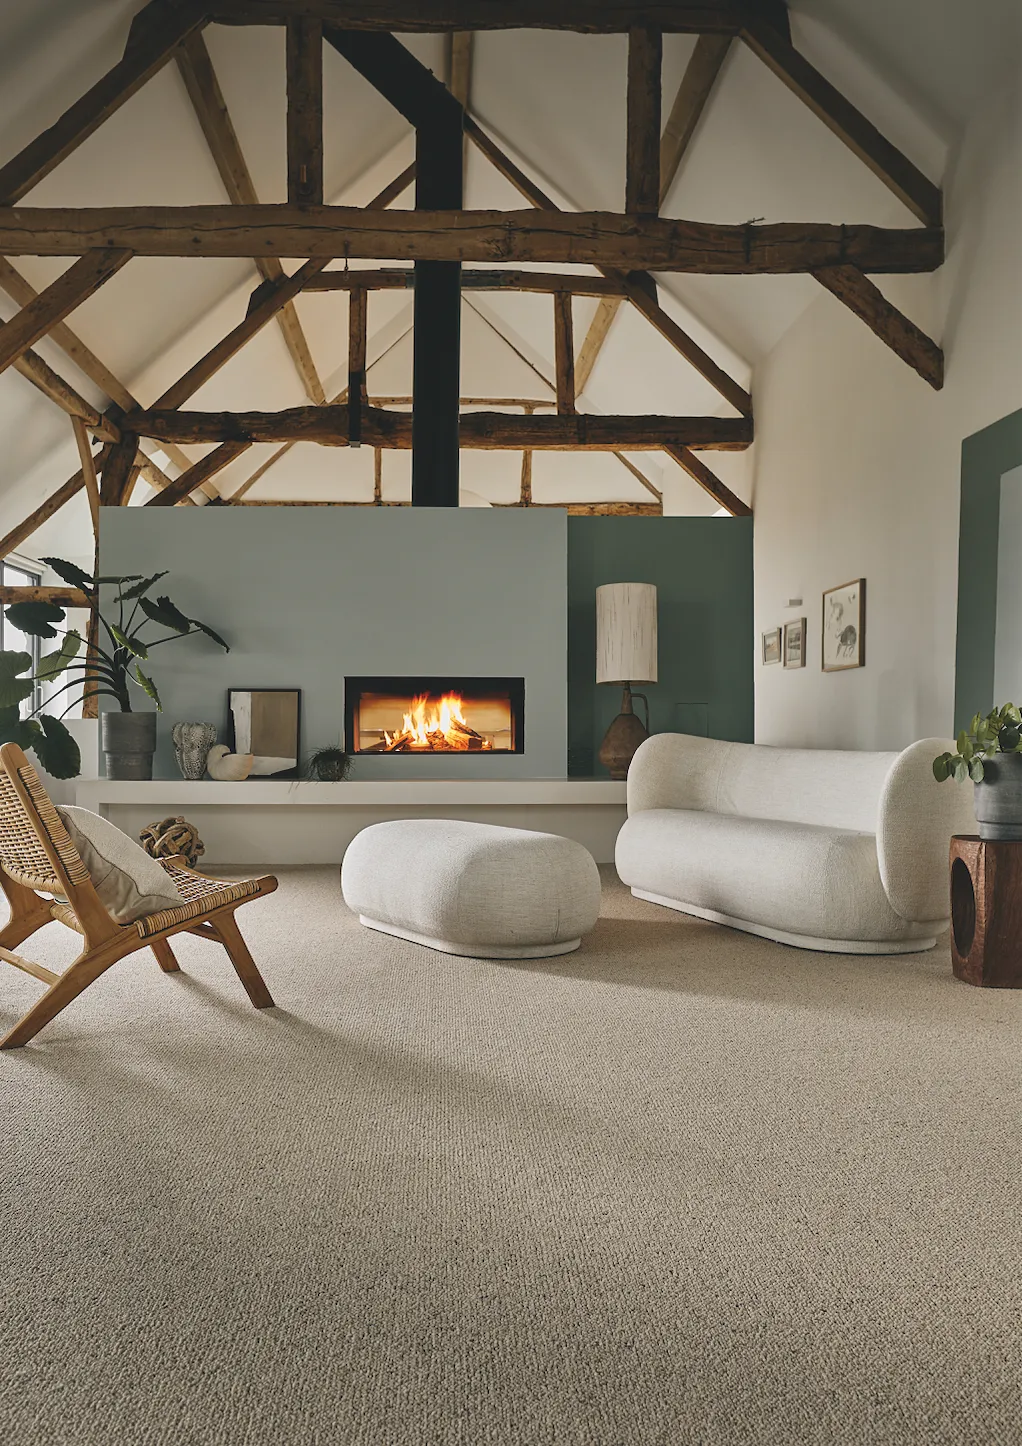 Go beyond a Berber rug and spread this woolly textile across the whole room for cosy and stylish warmth underfoot this winter. Auckland Berber wool carpet in Stone, £14.99 m sq, Carpetright